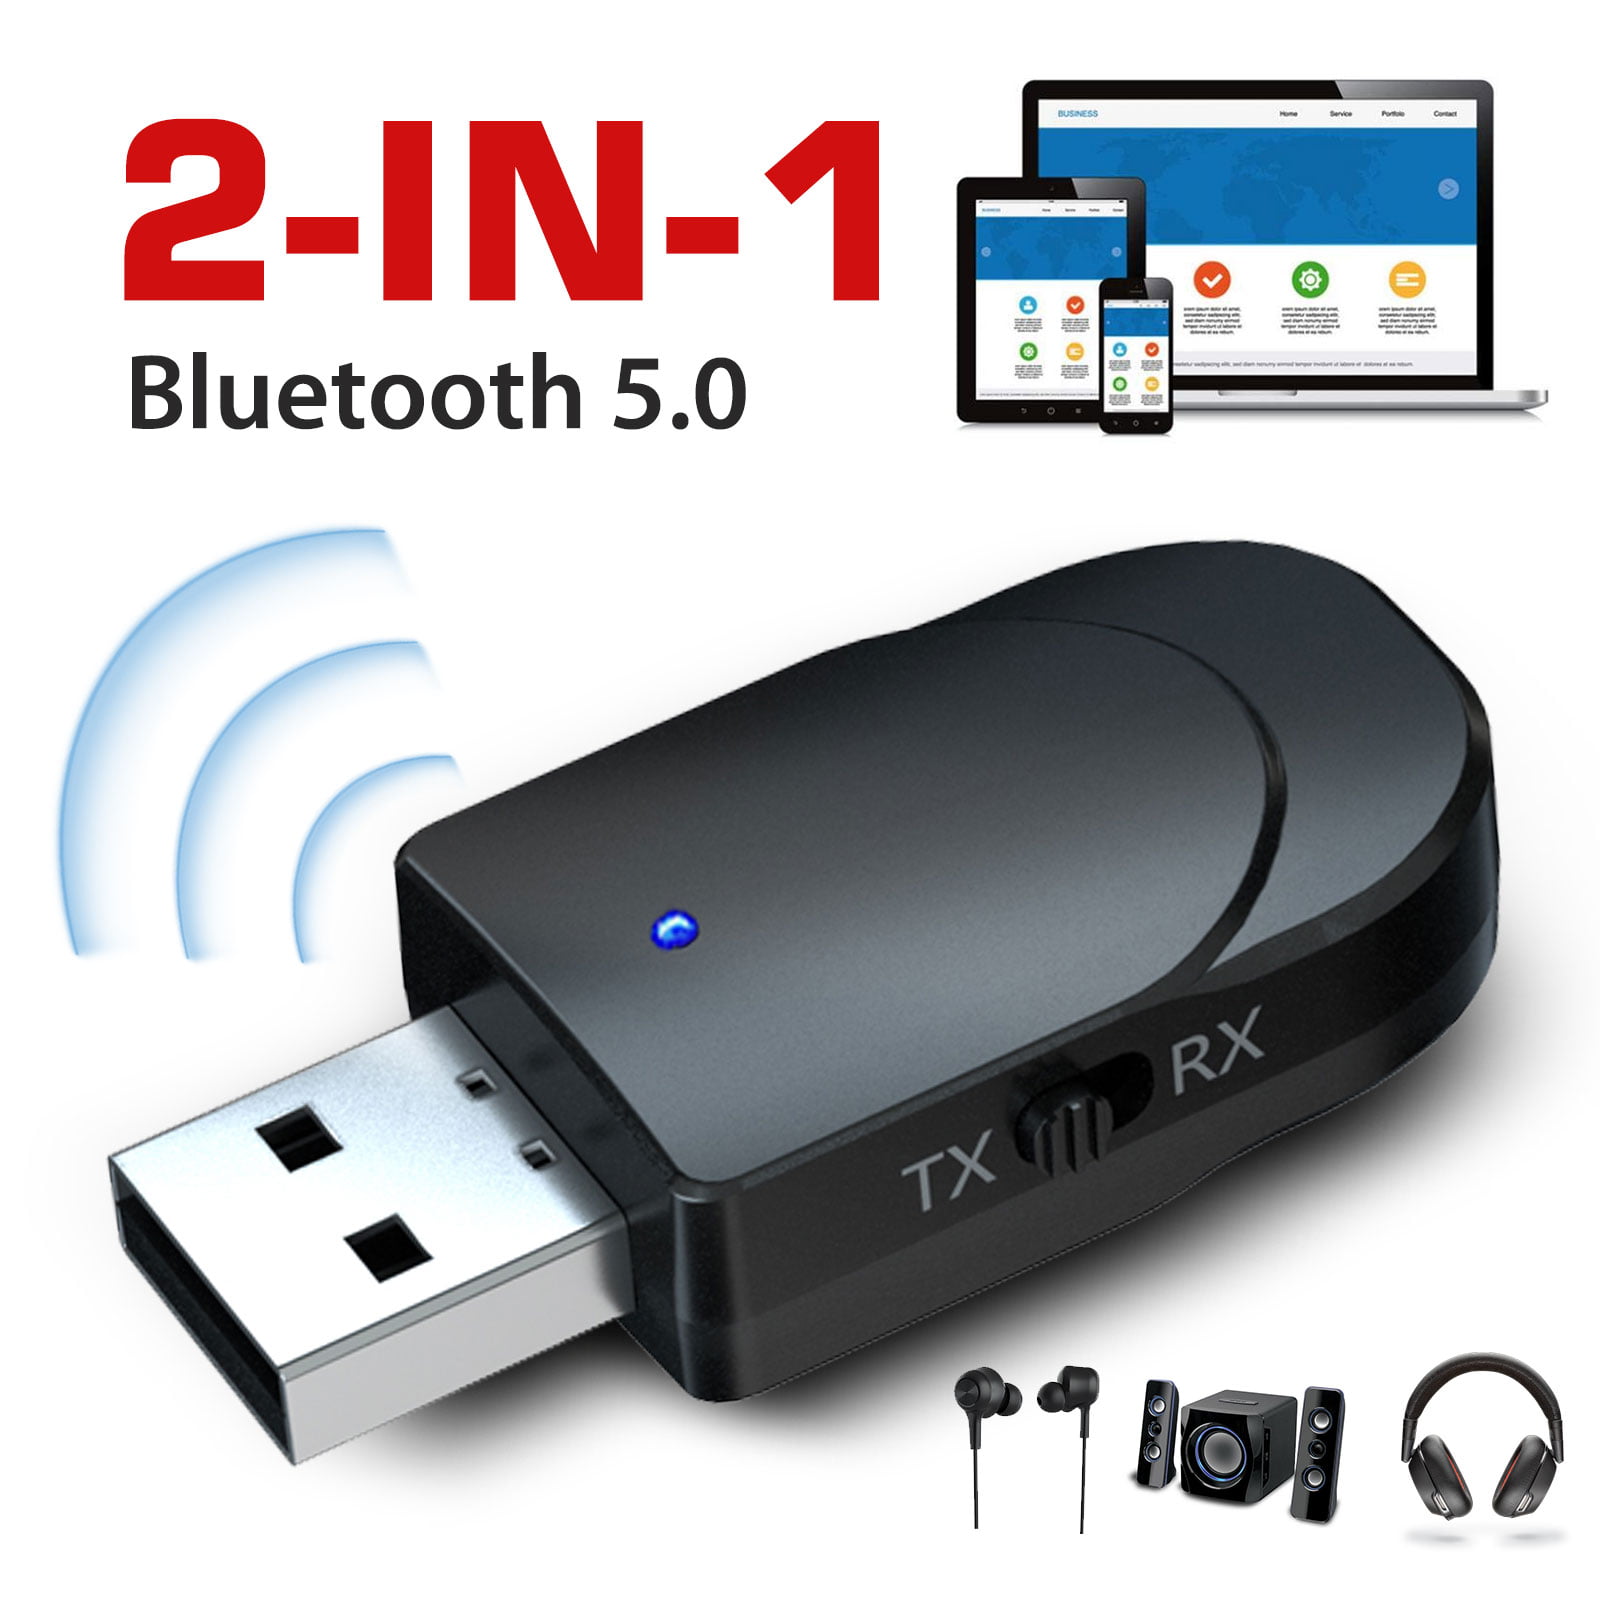 2IN1 Bluetooth Wireless Adapter Dongle/Transmitter/Modulator for PC TV Headphone 